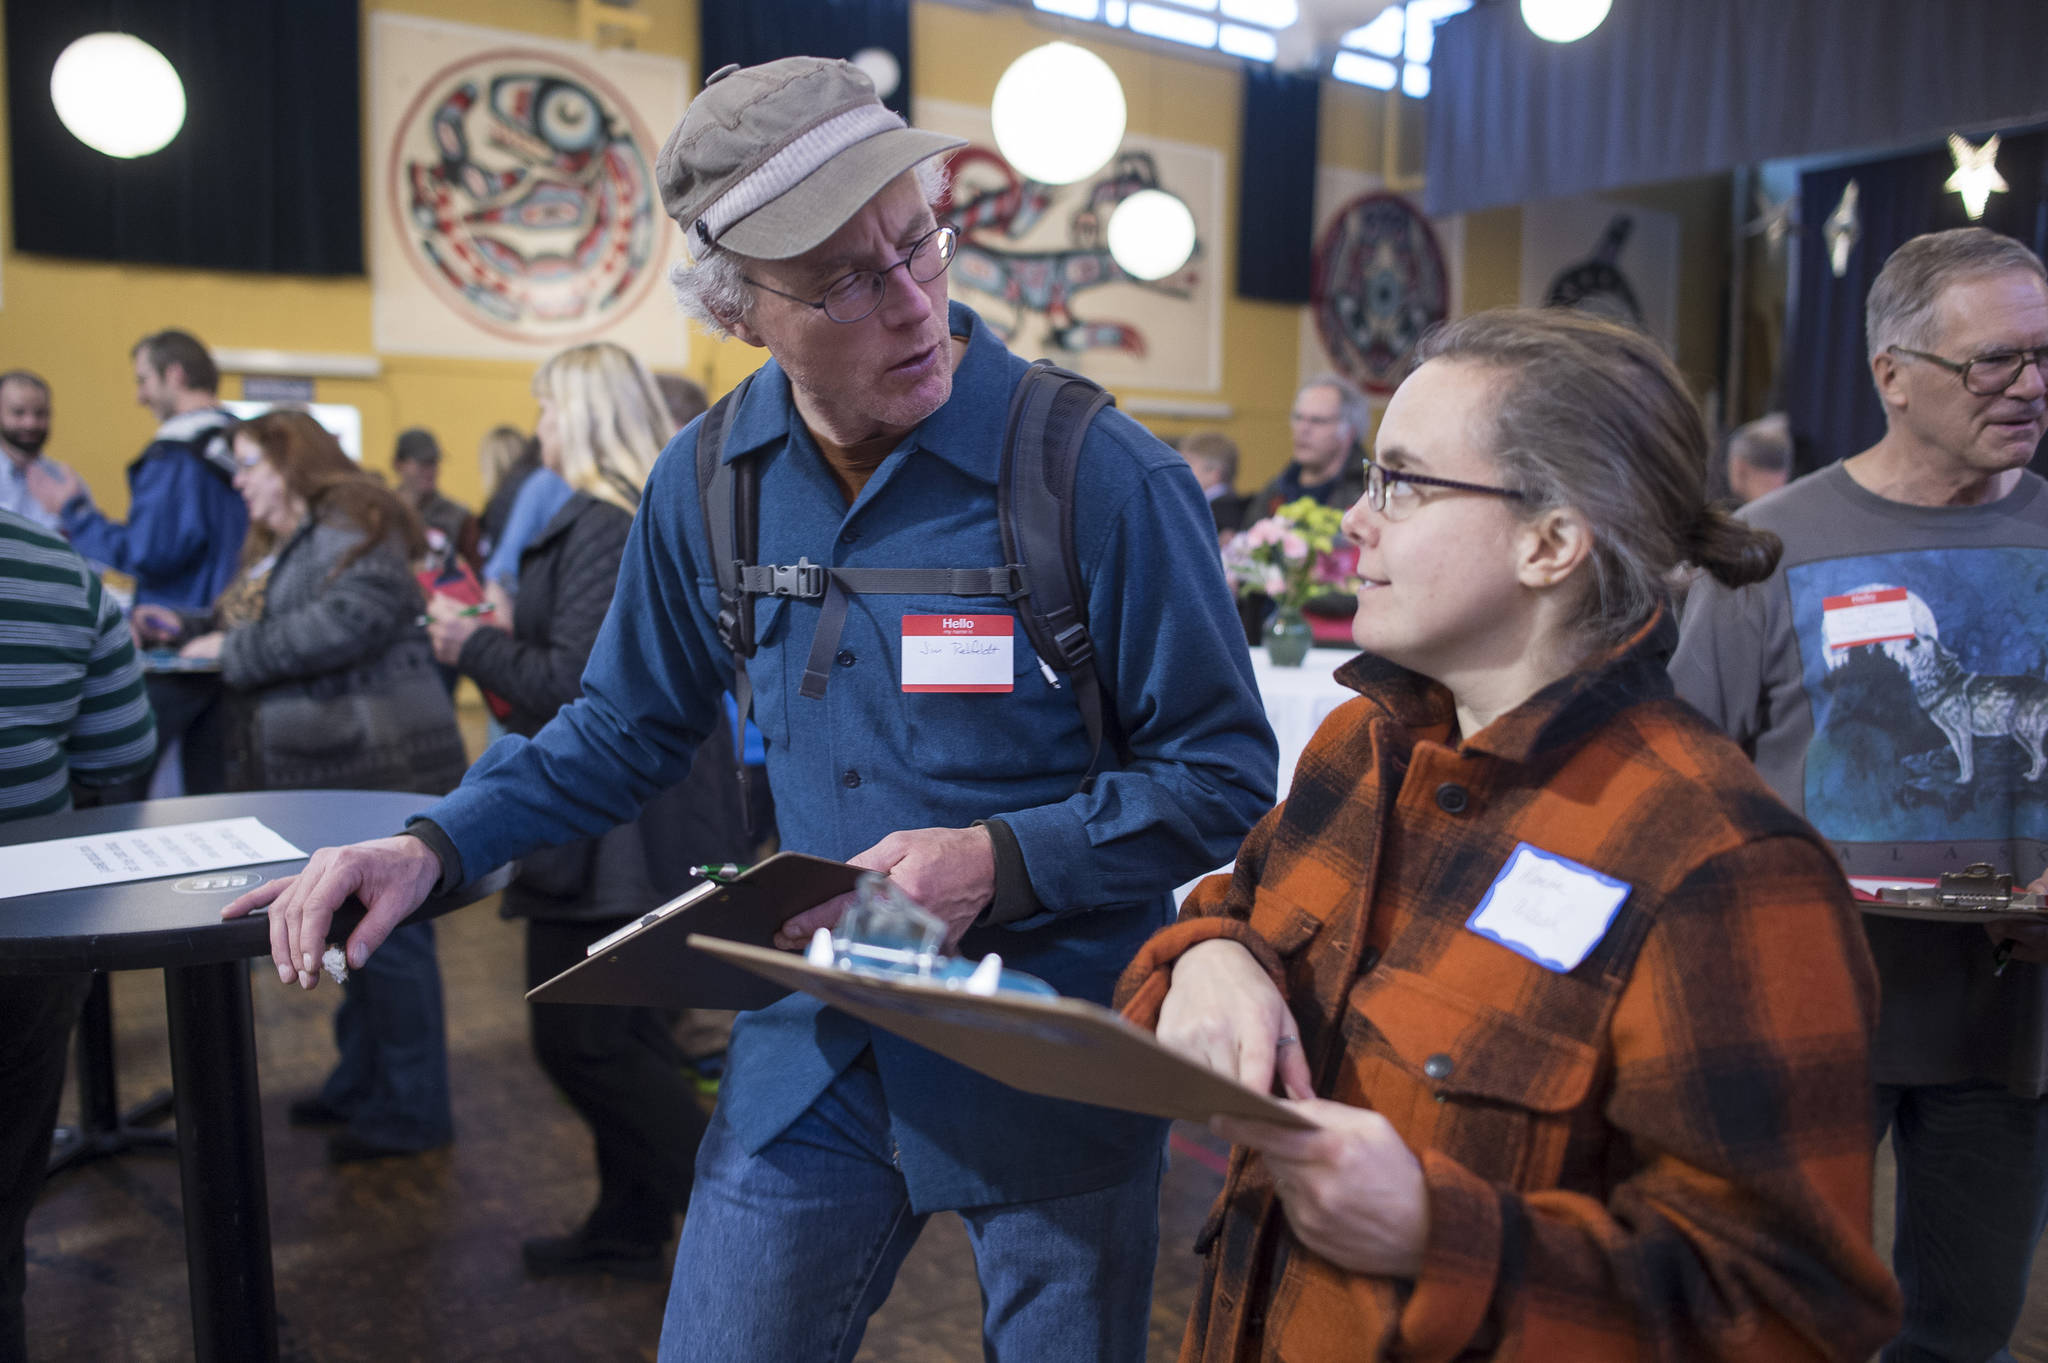 Engineer Jim Rehfeldt trades information with Glacier Valley Elementary Teacher Mareta Weed during a networking event for teachers and STEM community members at the Juneau Arts and Culture Center on Tuesday, Oct. 17, 2017. The SouthEast Exchange is a new collaboration started by scientists and school teachers, in conjunction with the Juneau STEM Coalition and JEDC. Its broad mission is to share ideas, experience and knowledge within our community and, particularly, to facilitate connections among professionals and teachers to enrich education for Juneau students. (Michael Penn | Juneau Empire File)